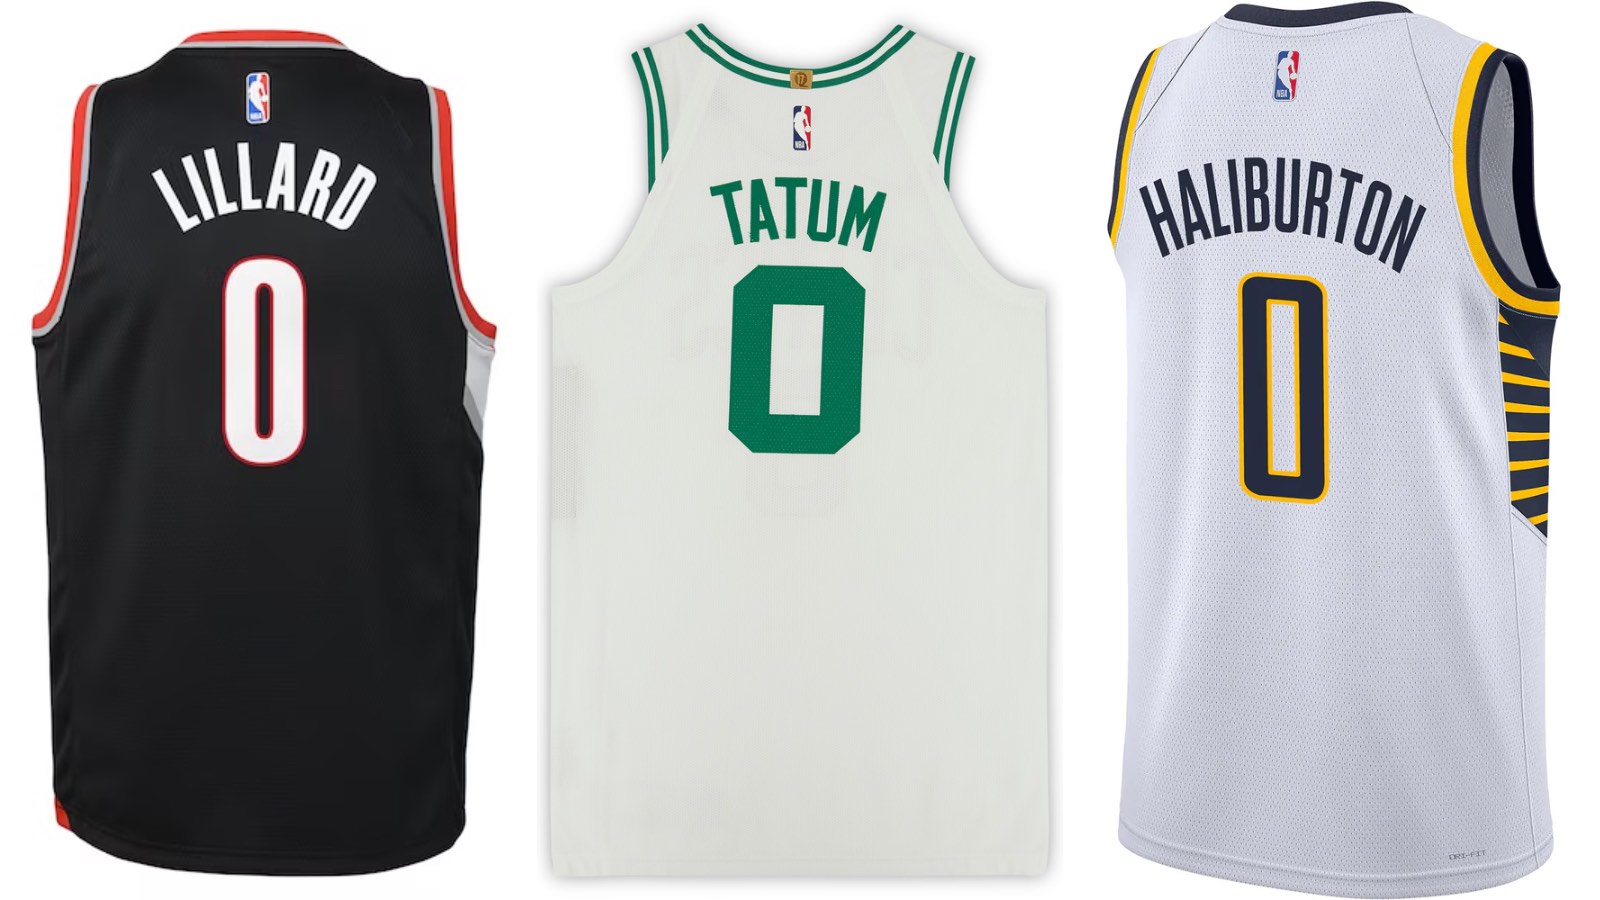 Here's a look at the 2023 #NBAAllStar jerseys ⭐️ 🛒 Coming soon